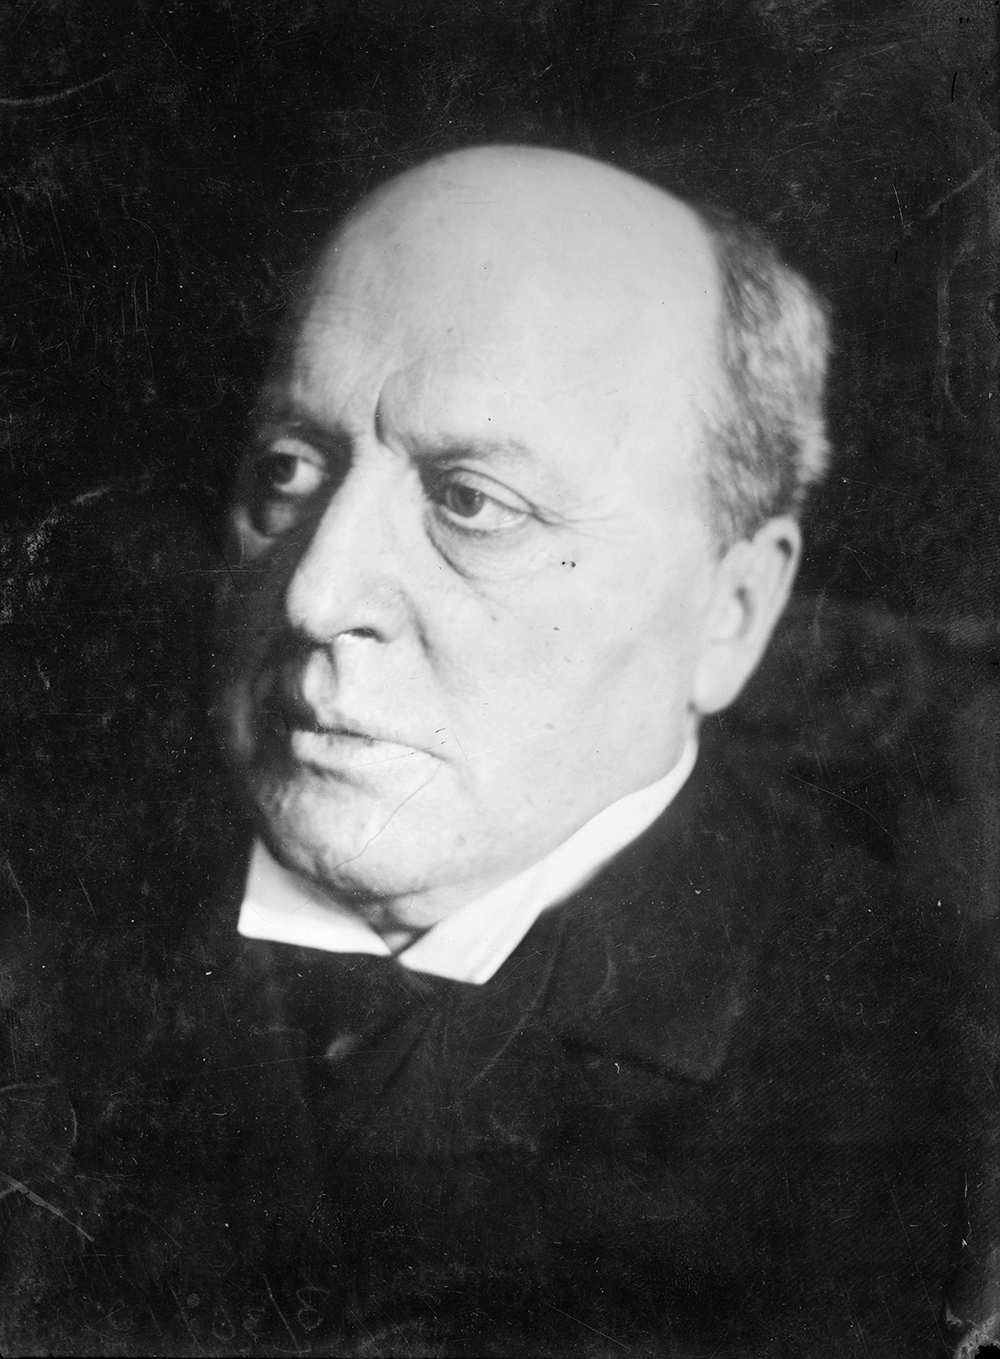 Henry James. George Grantham Bain Collection, Library of Congress Prints and Photographs Division.